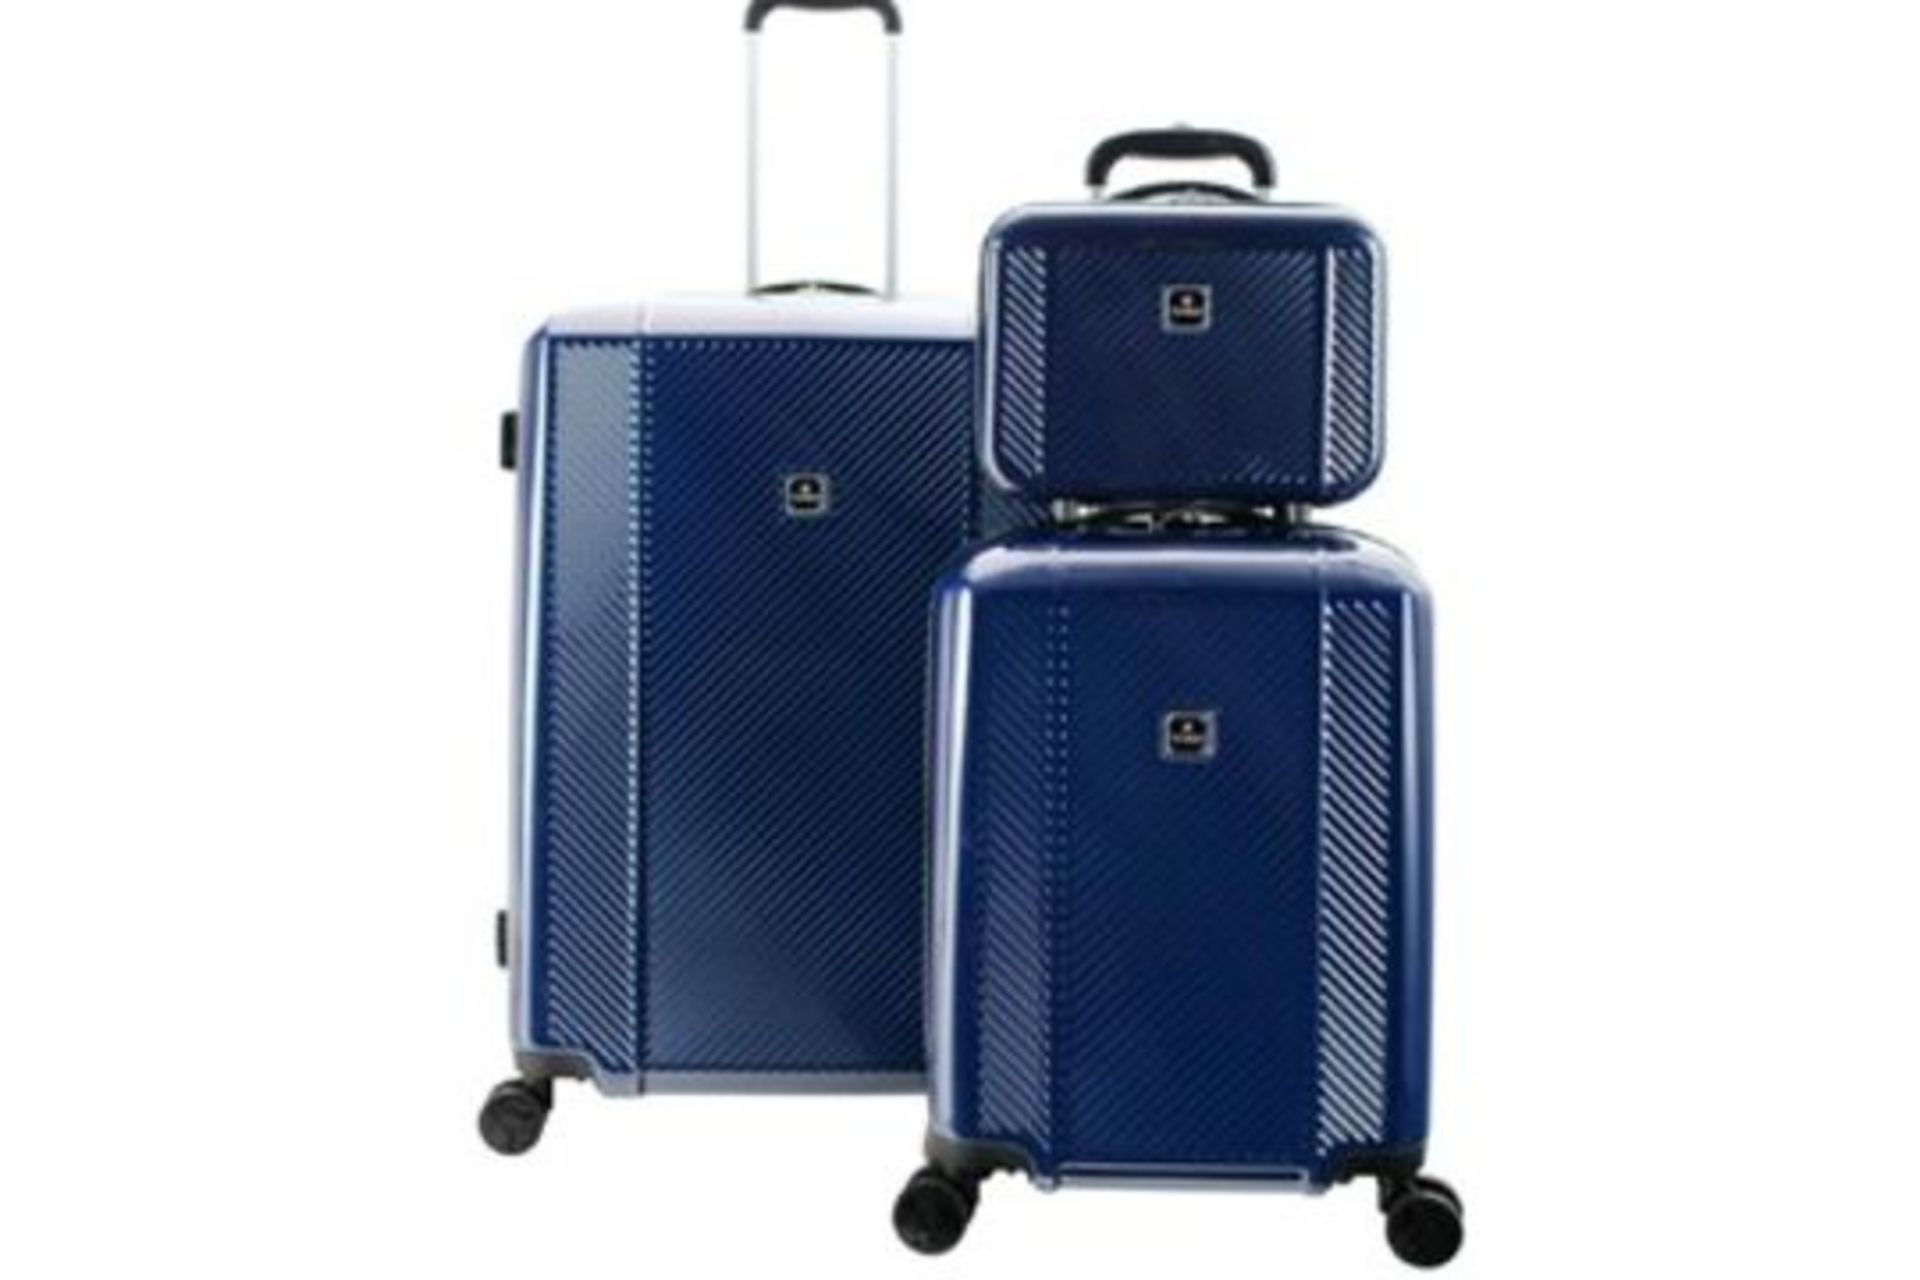 3 x New Boxed 3 Piece Sets of TAG Spectrum Hardside Luggage Set. (BLUE). RRP £199.99 per set. Get - Image 3 of 4